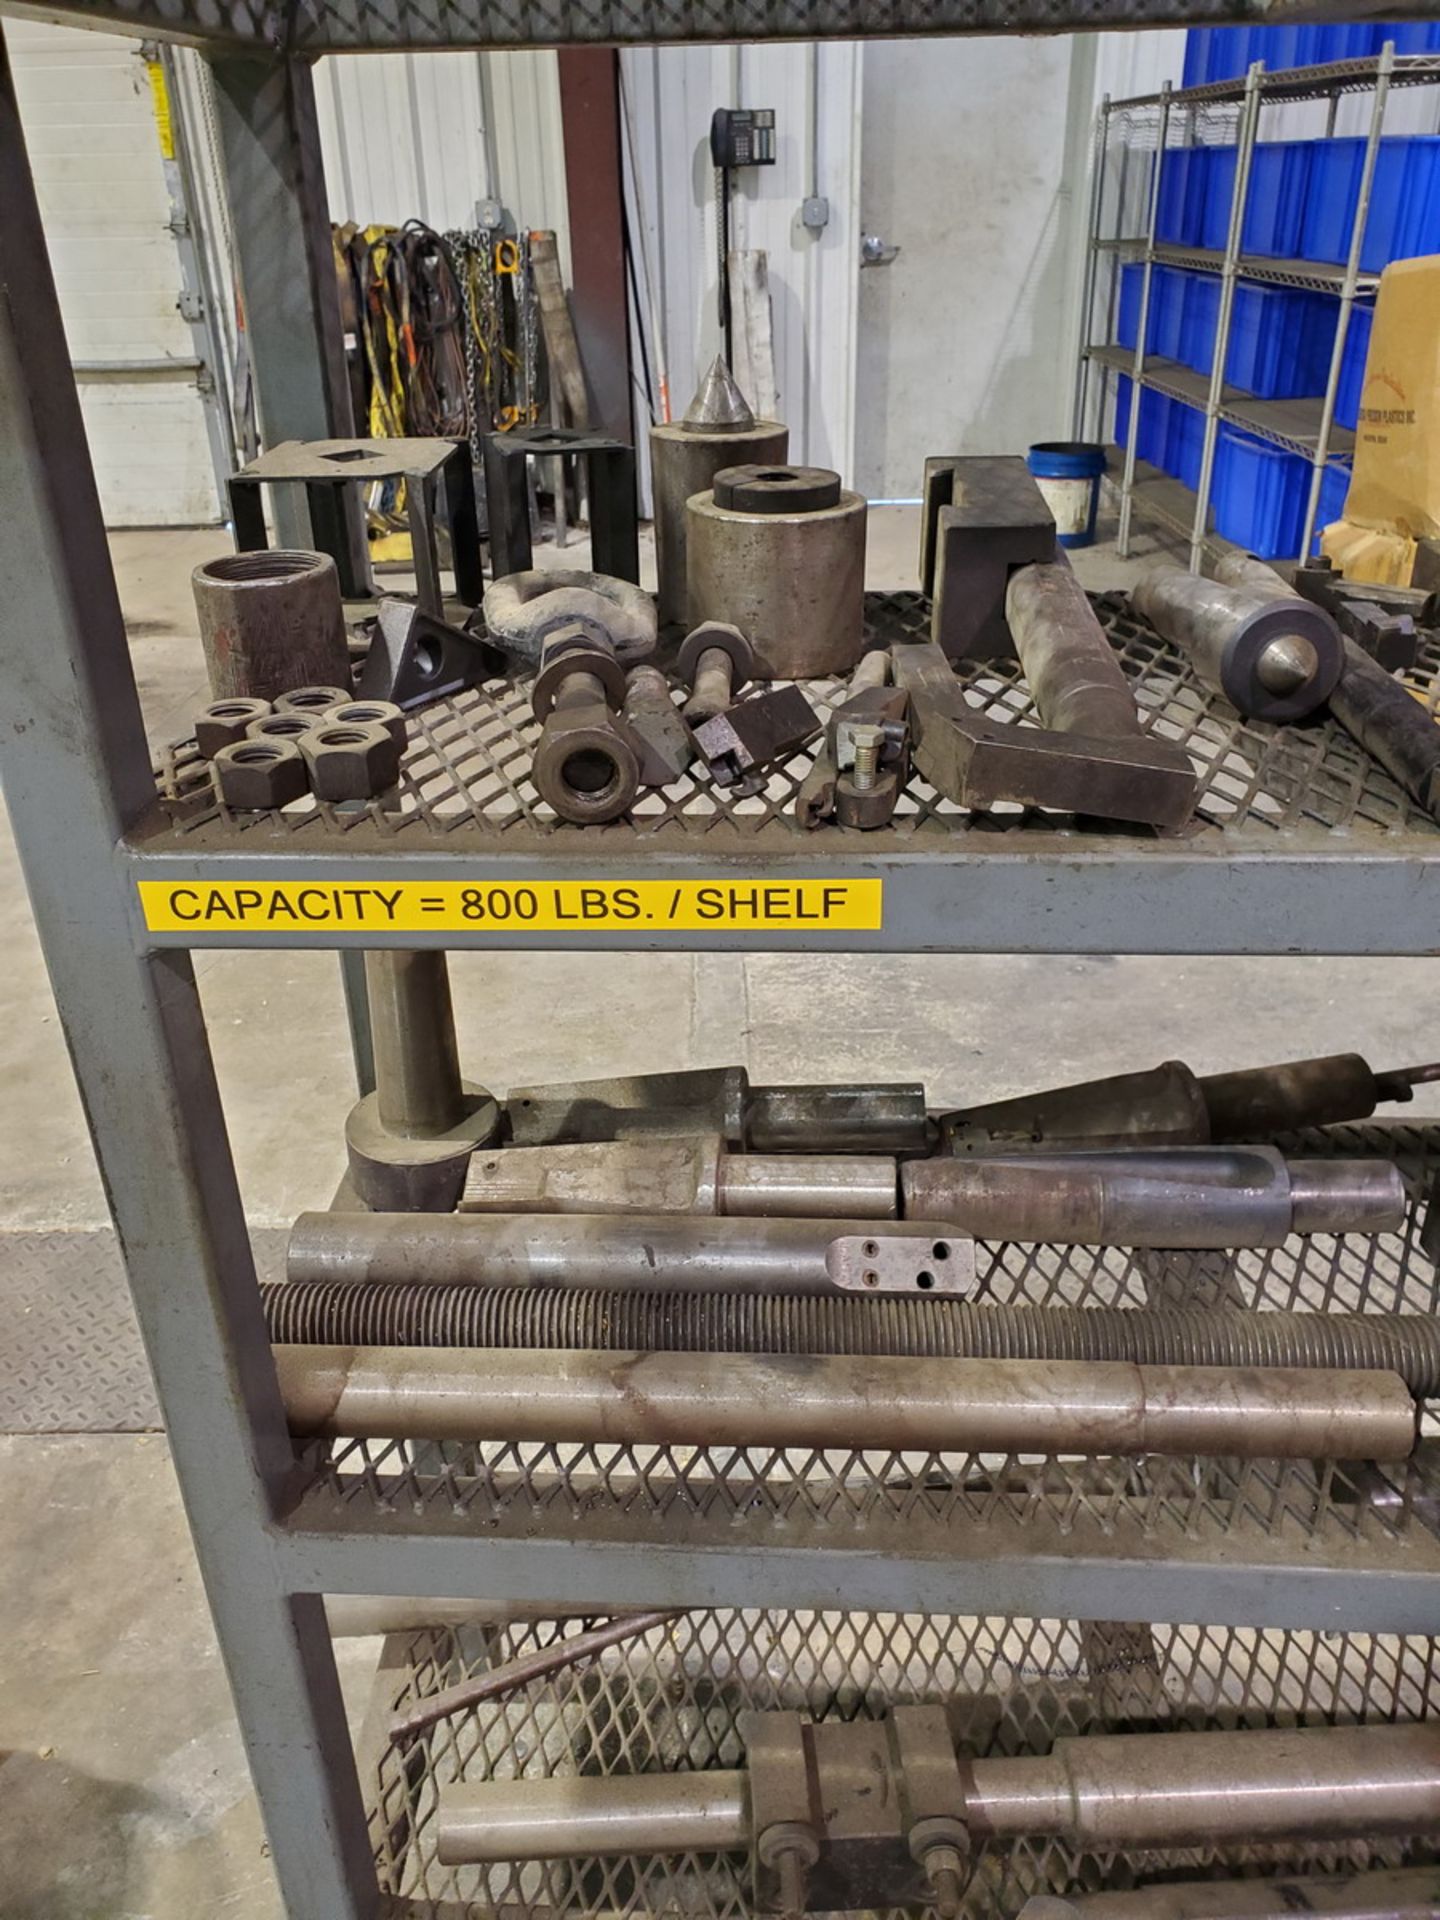 Lathe Tooling To Include But Not Limited To: Jaws, Tool Holders, Boring Bars, Live Centers, etc. - Image 7 of 12